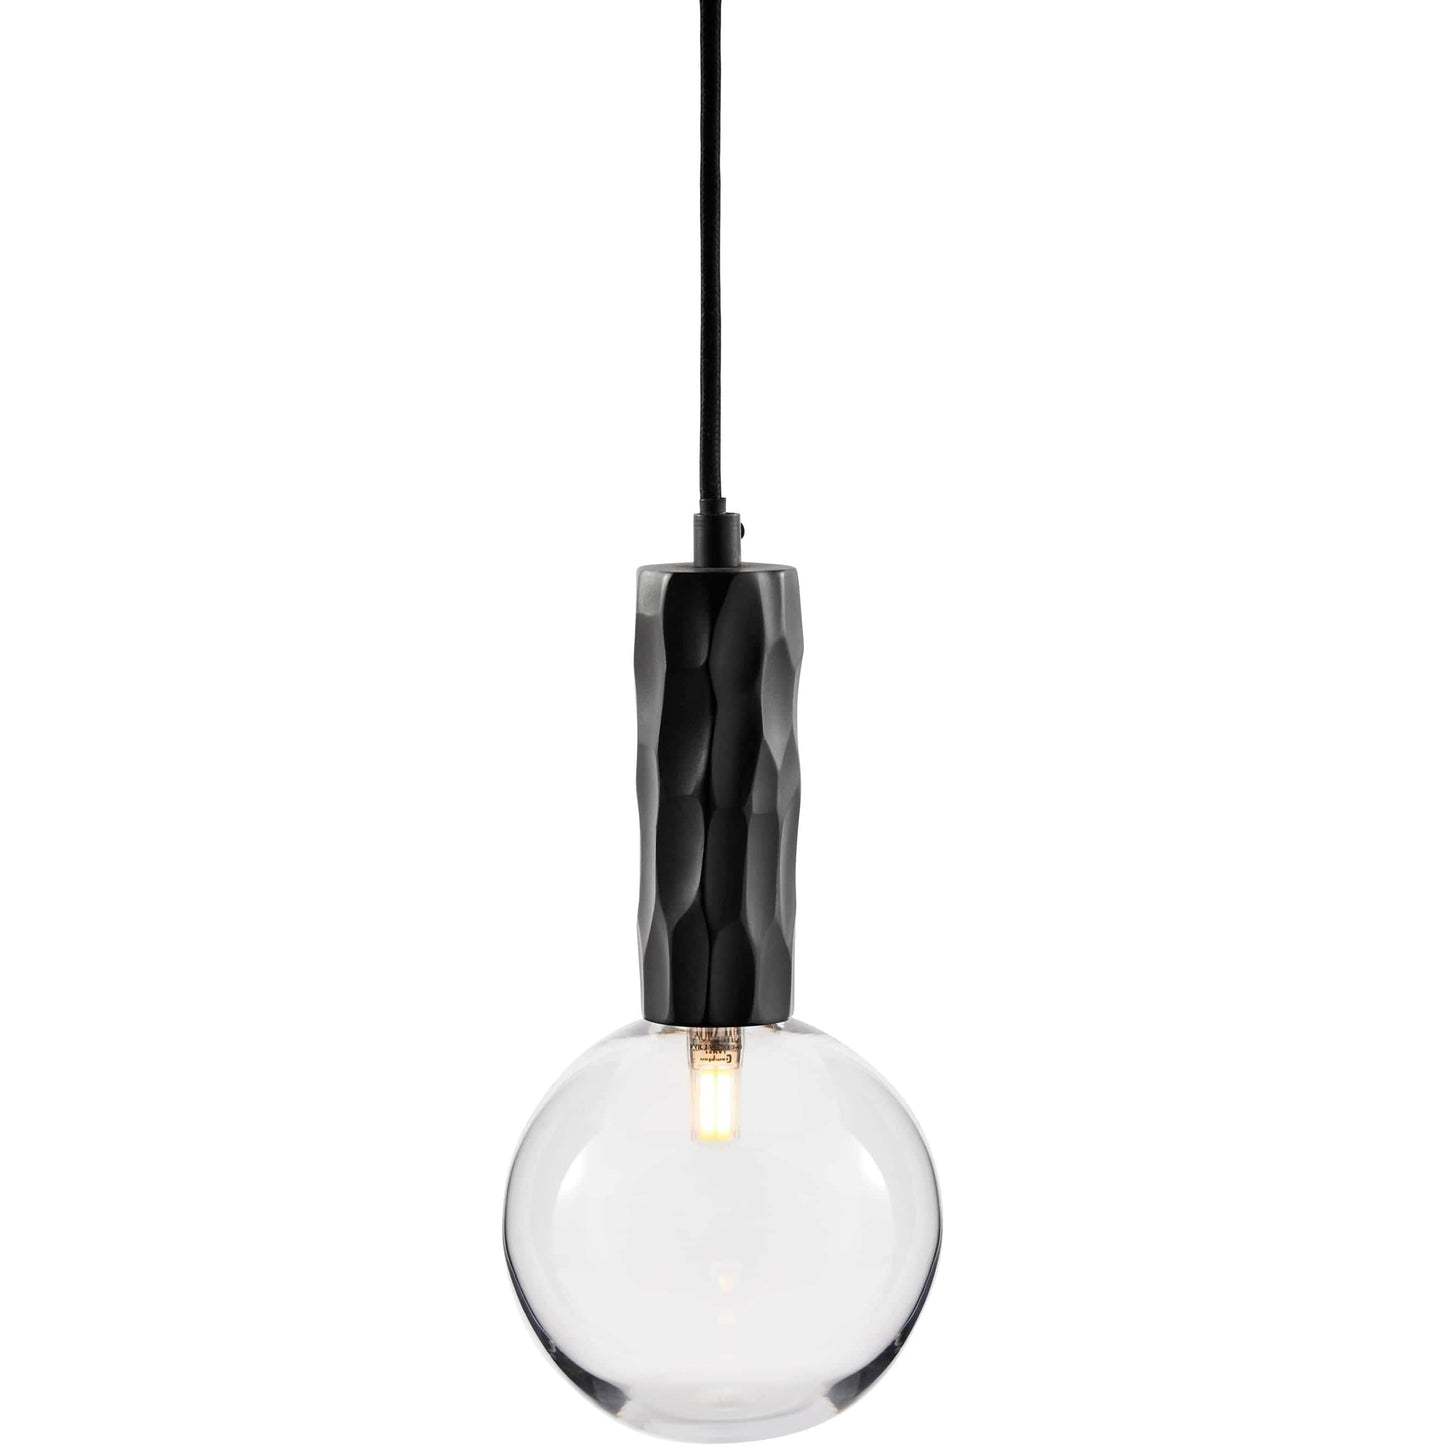 Alex Price Pendant lights KYOTO Pendant Light Black with White, Smoked or Clear Glass